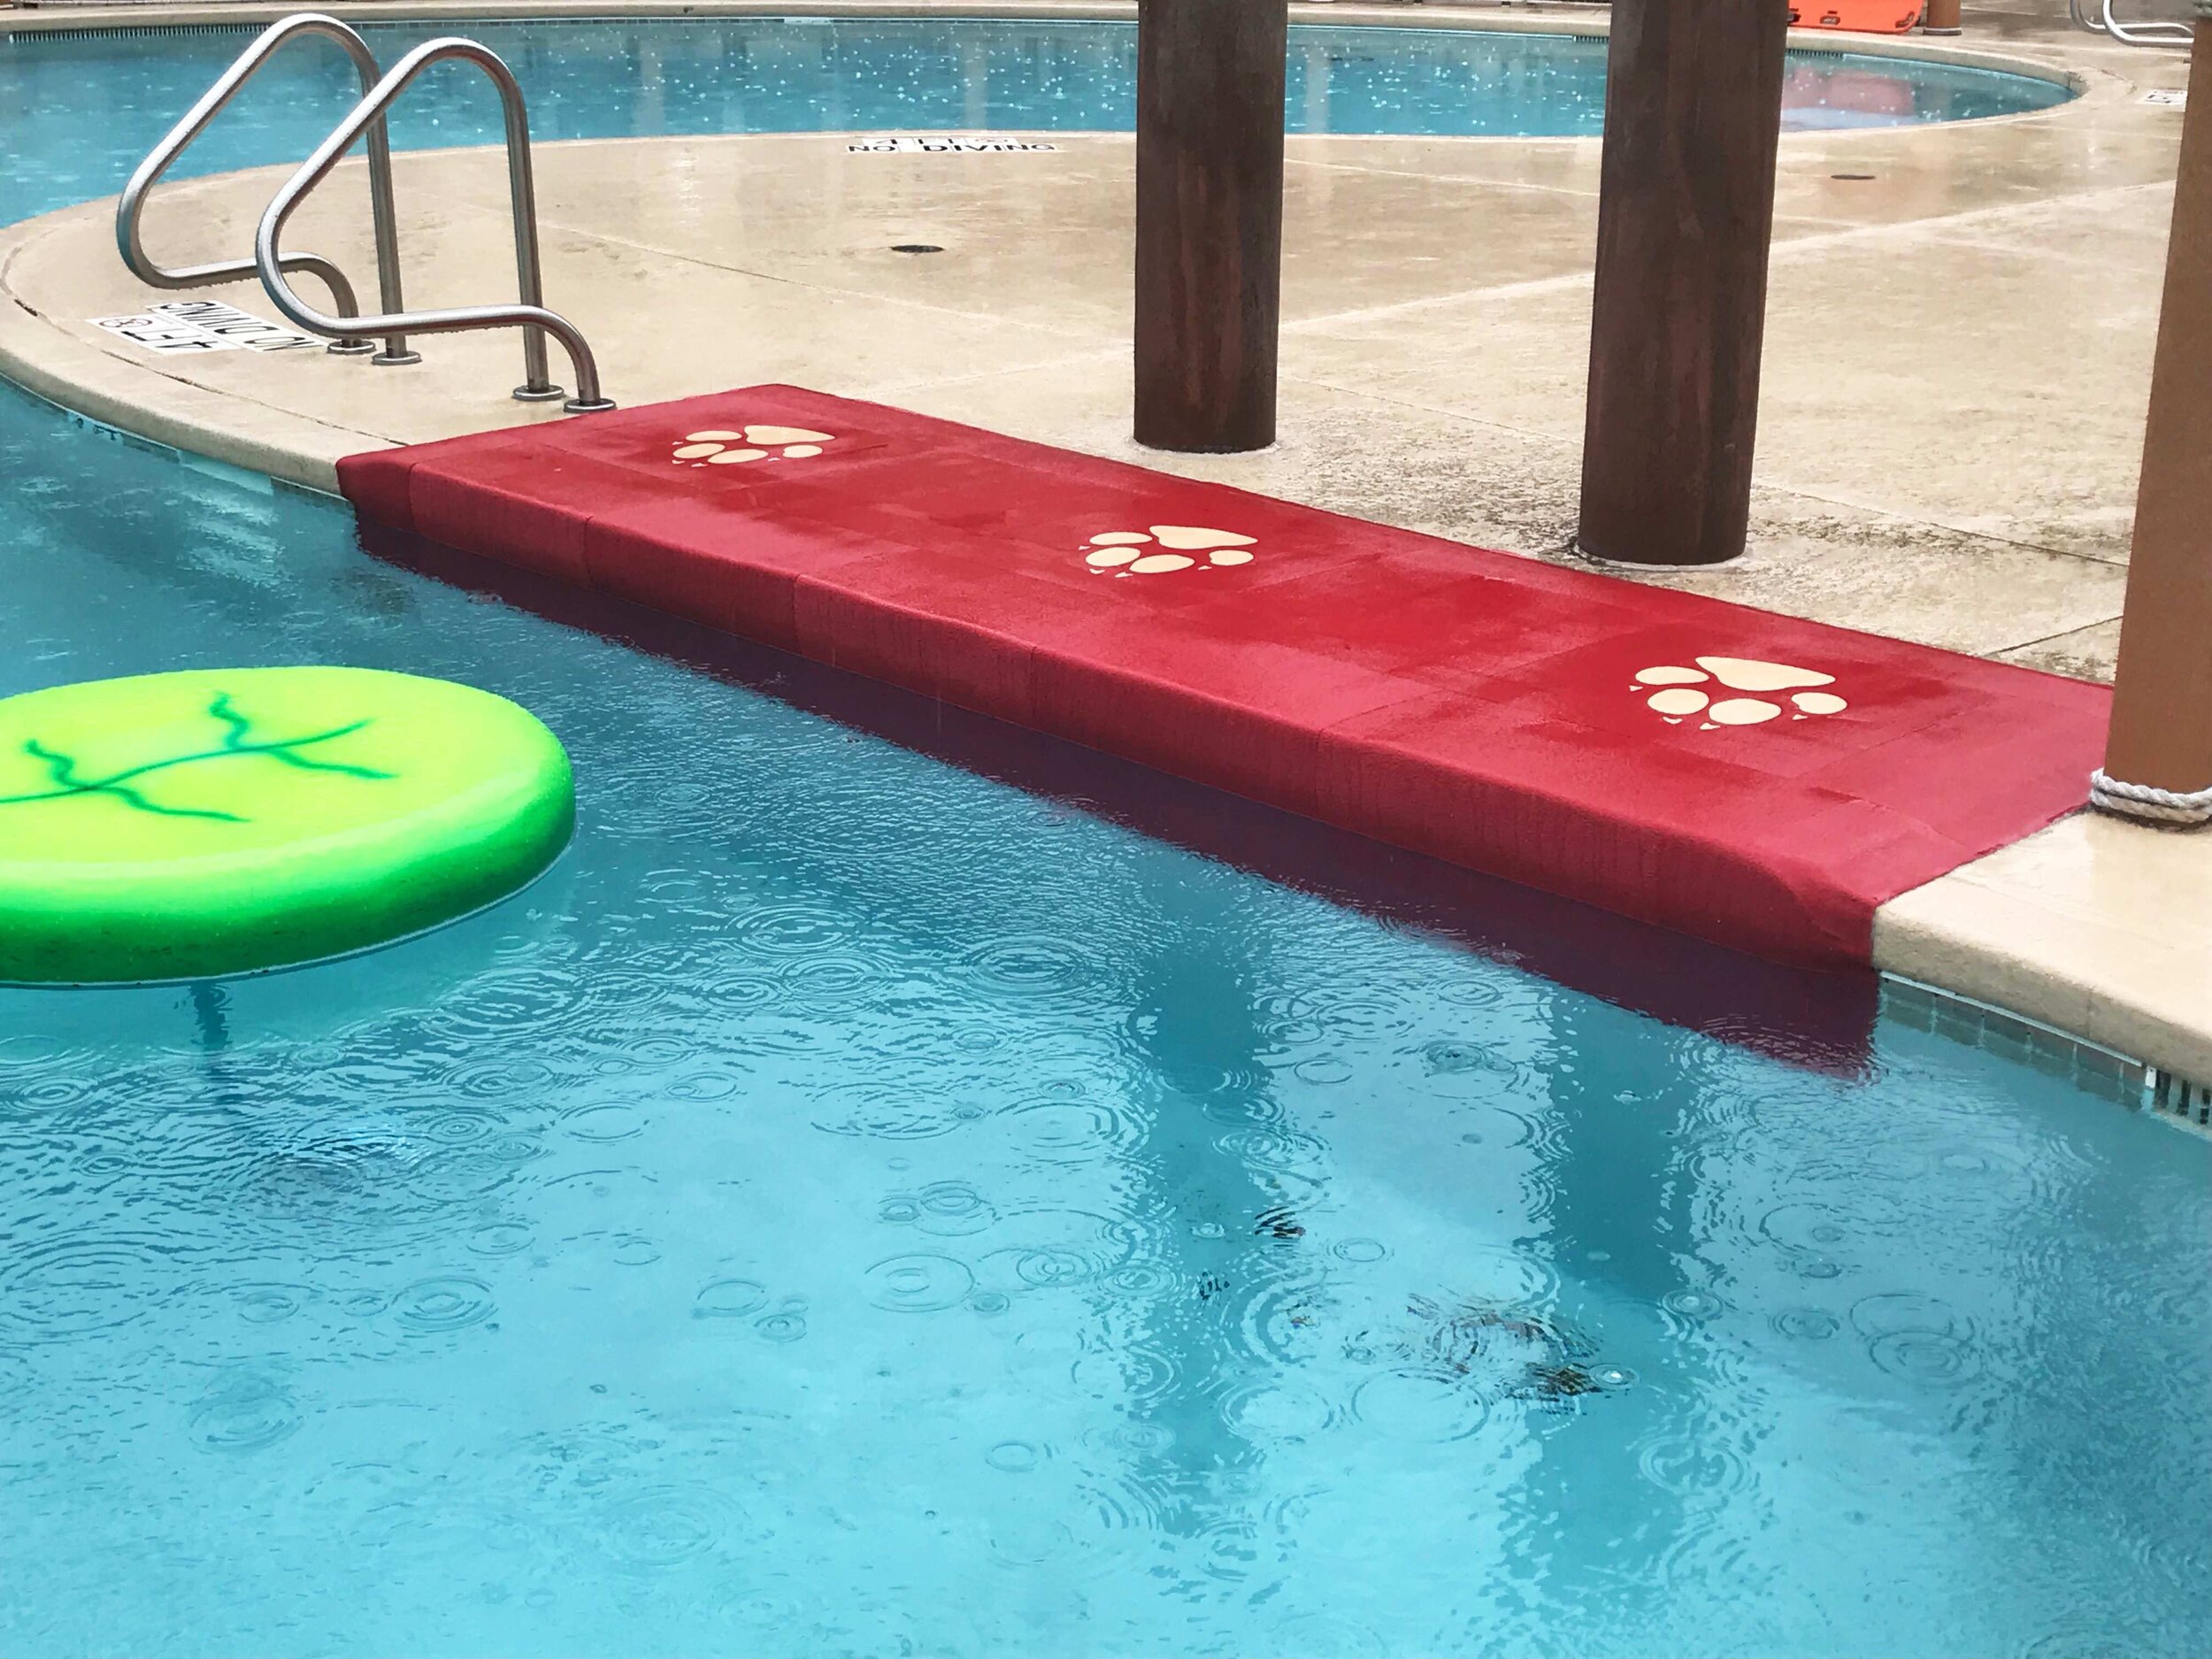 how to make a pool or splash pad safer when lifeguards aren't